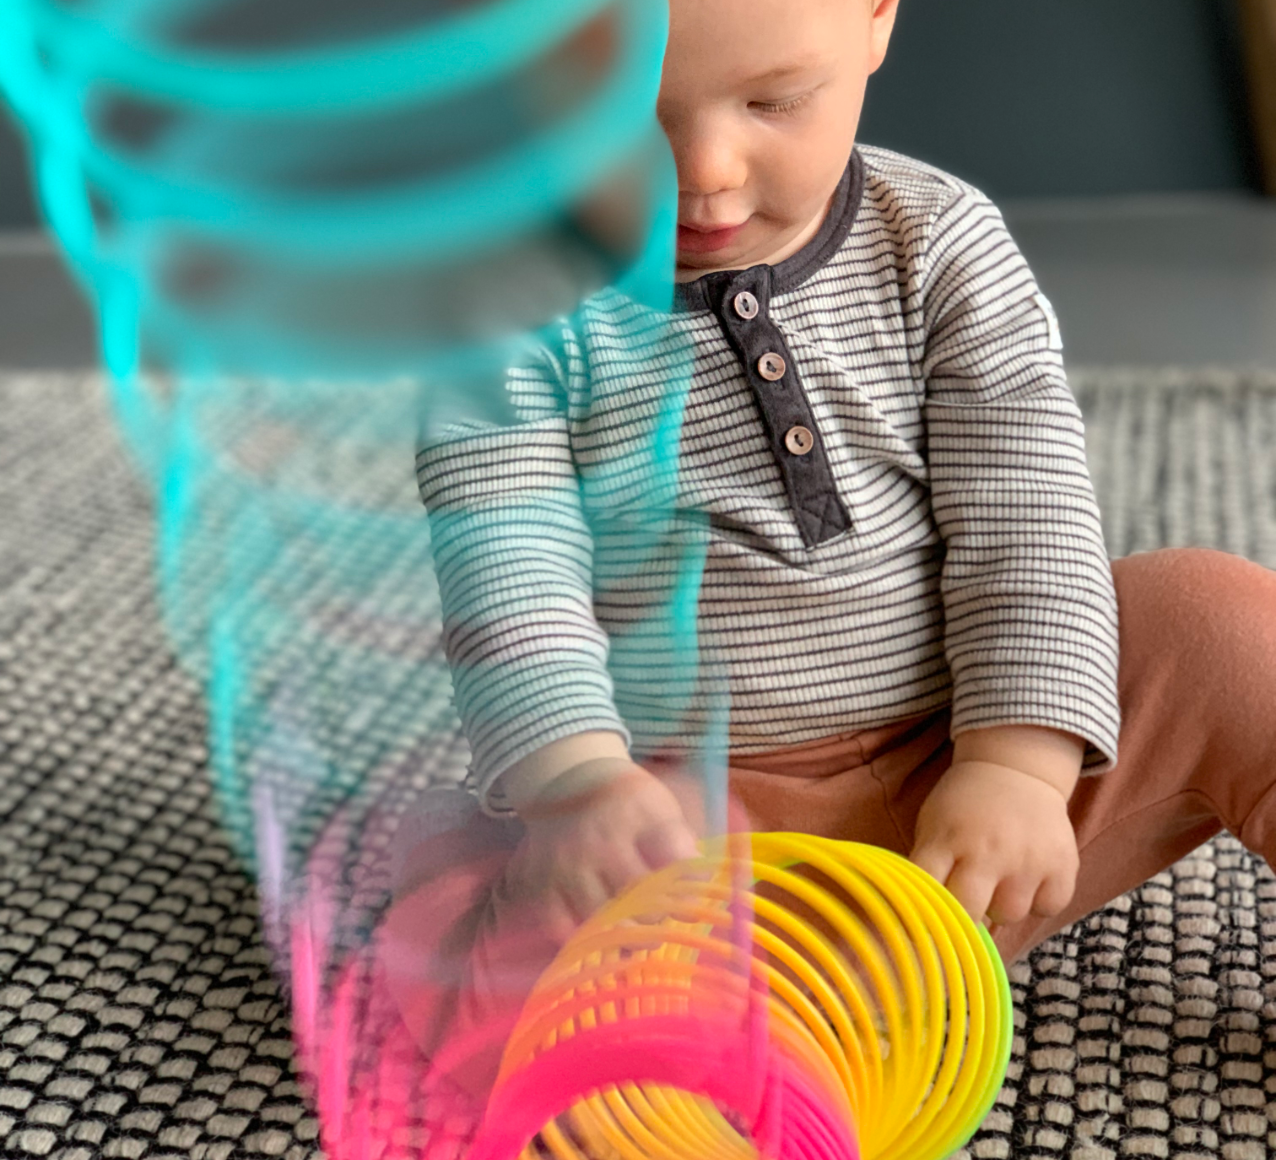 Refresh your baby’s toys to help develop new motor skills